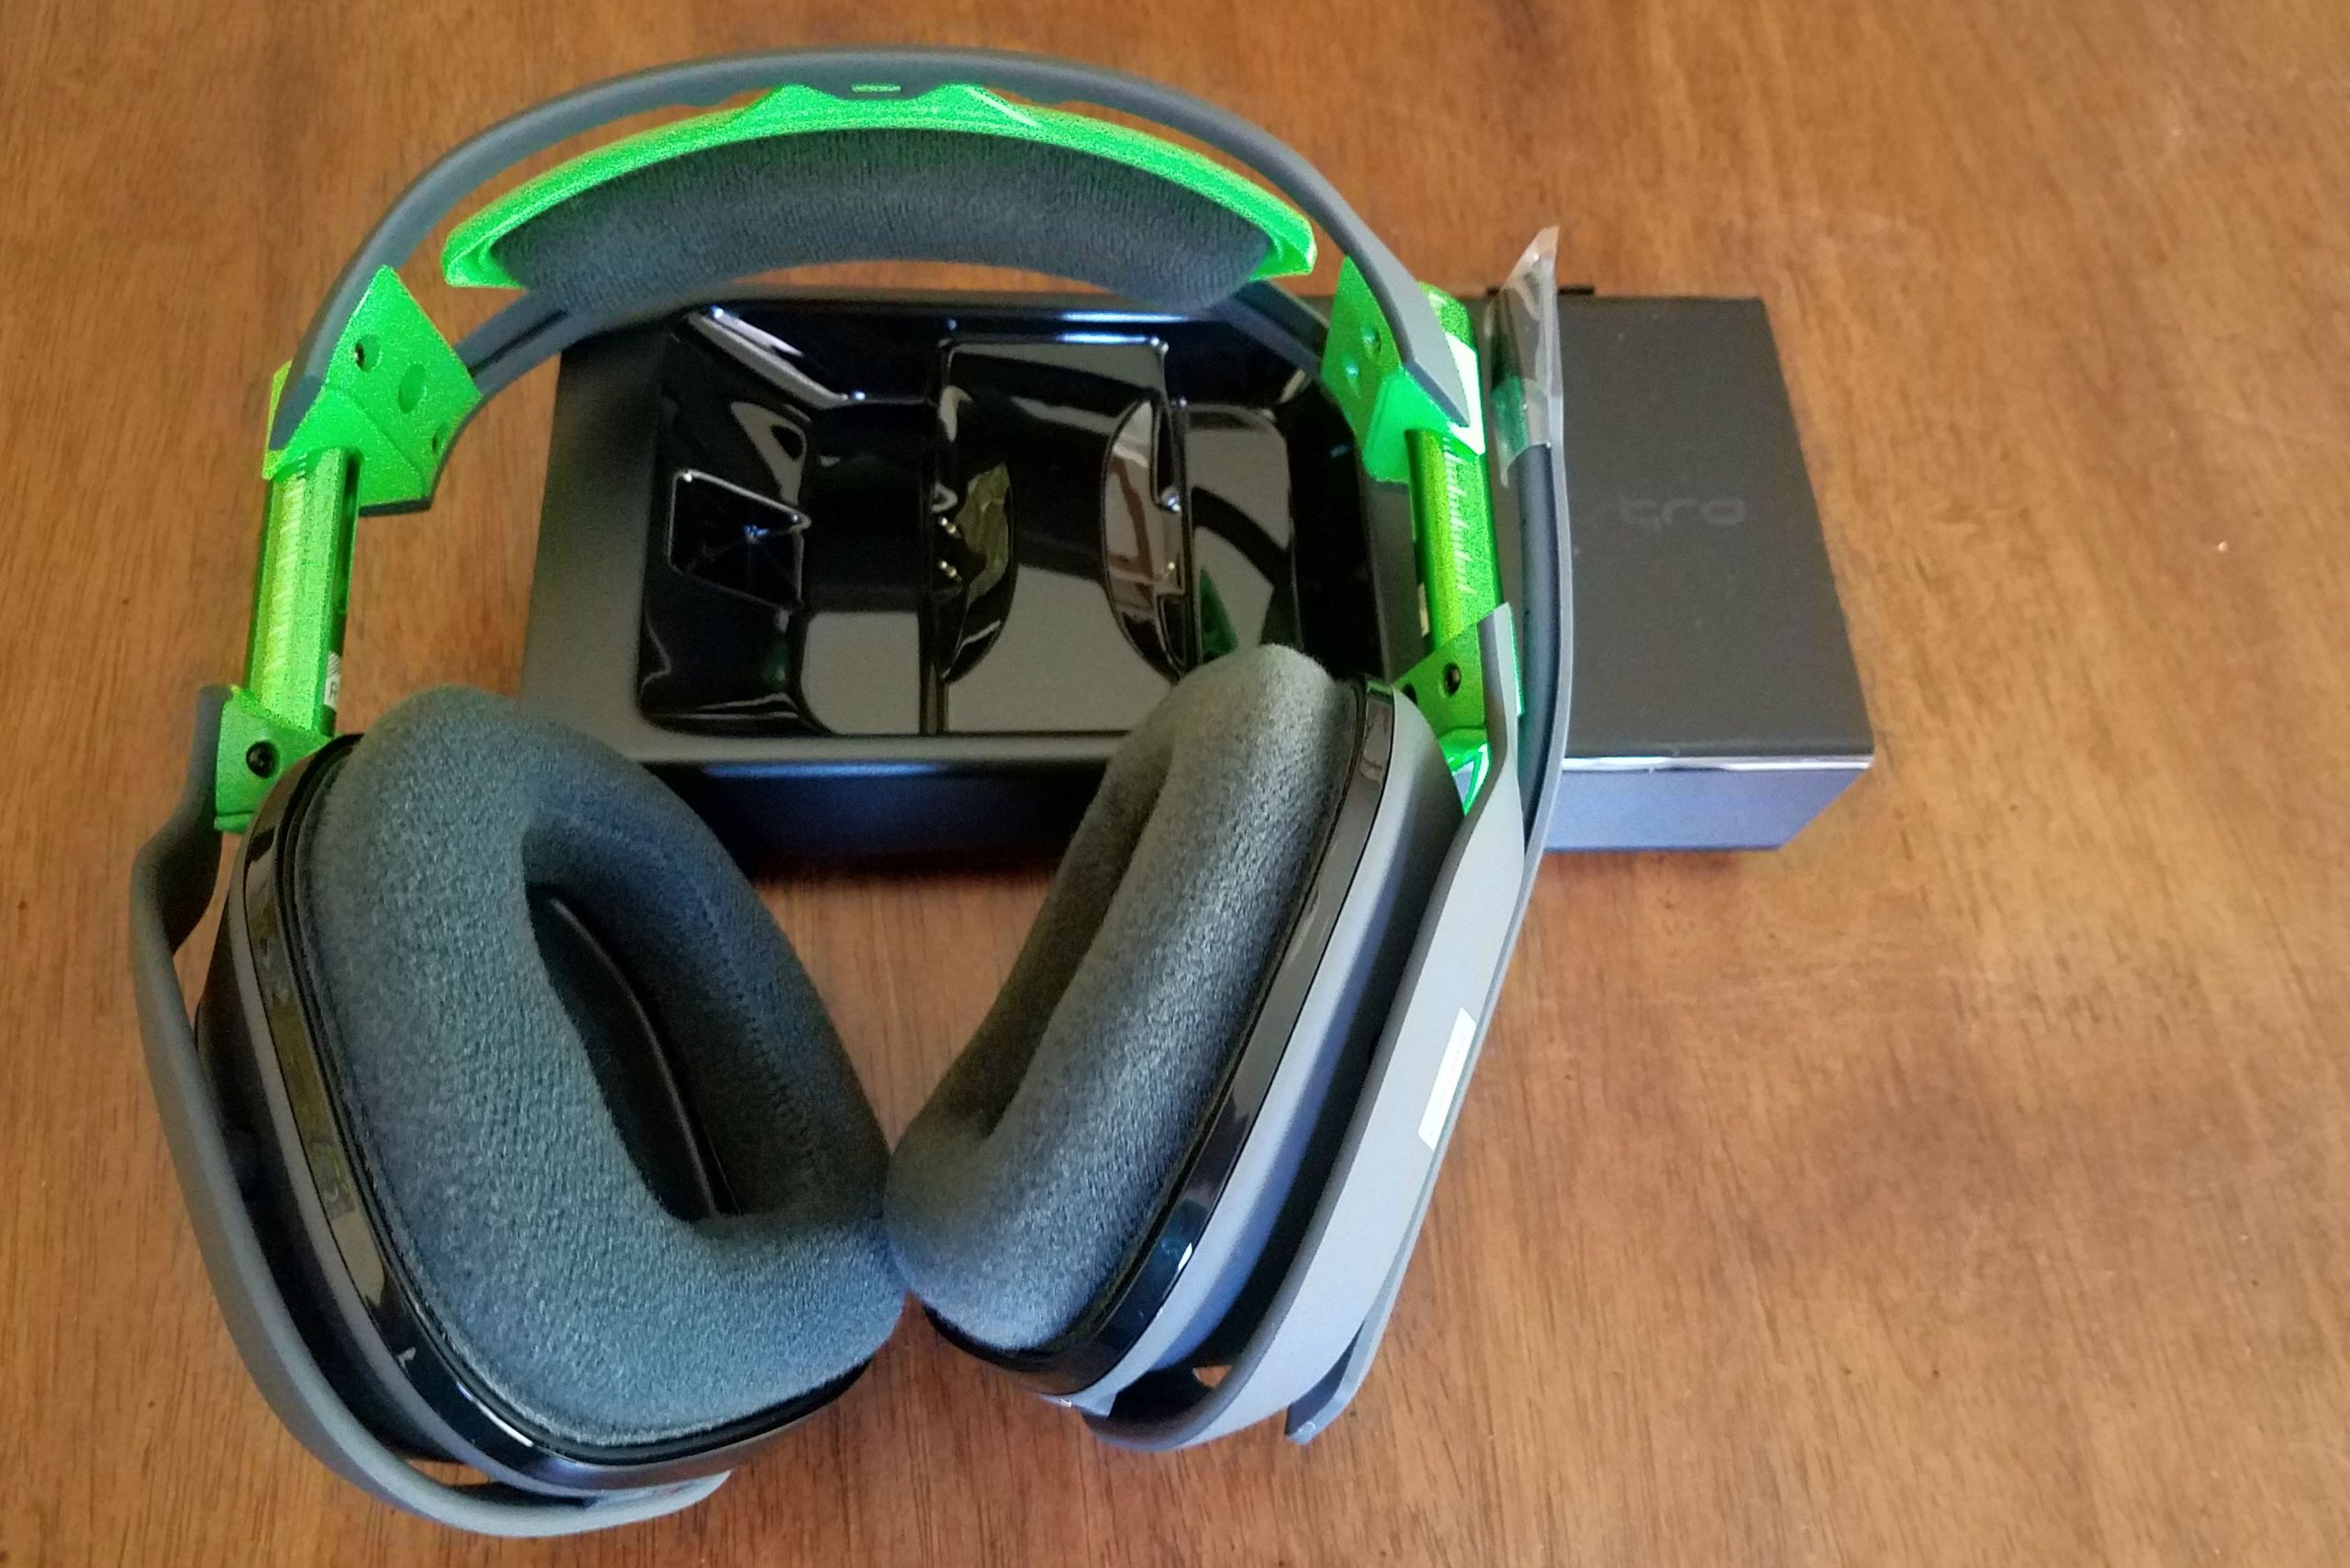 heilig Trouwens Okkernoot Astro A50 With Xbox Adapter Review : Best Wireless Headset For Xbox One